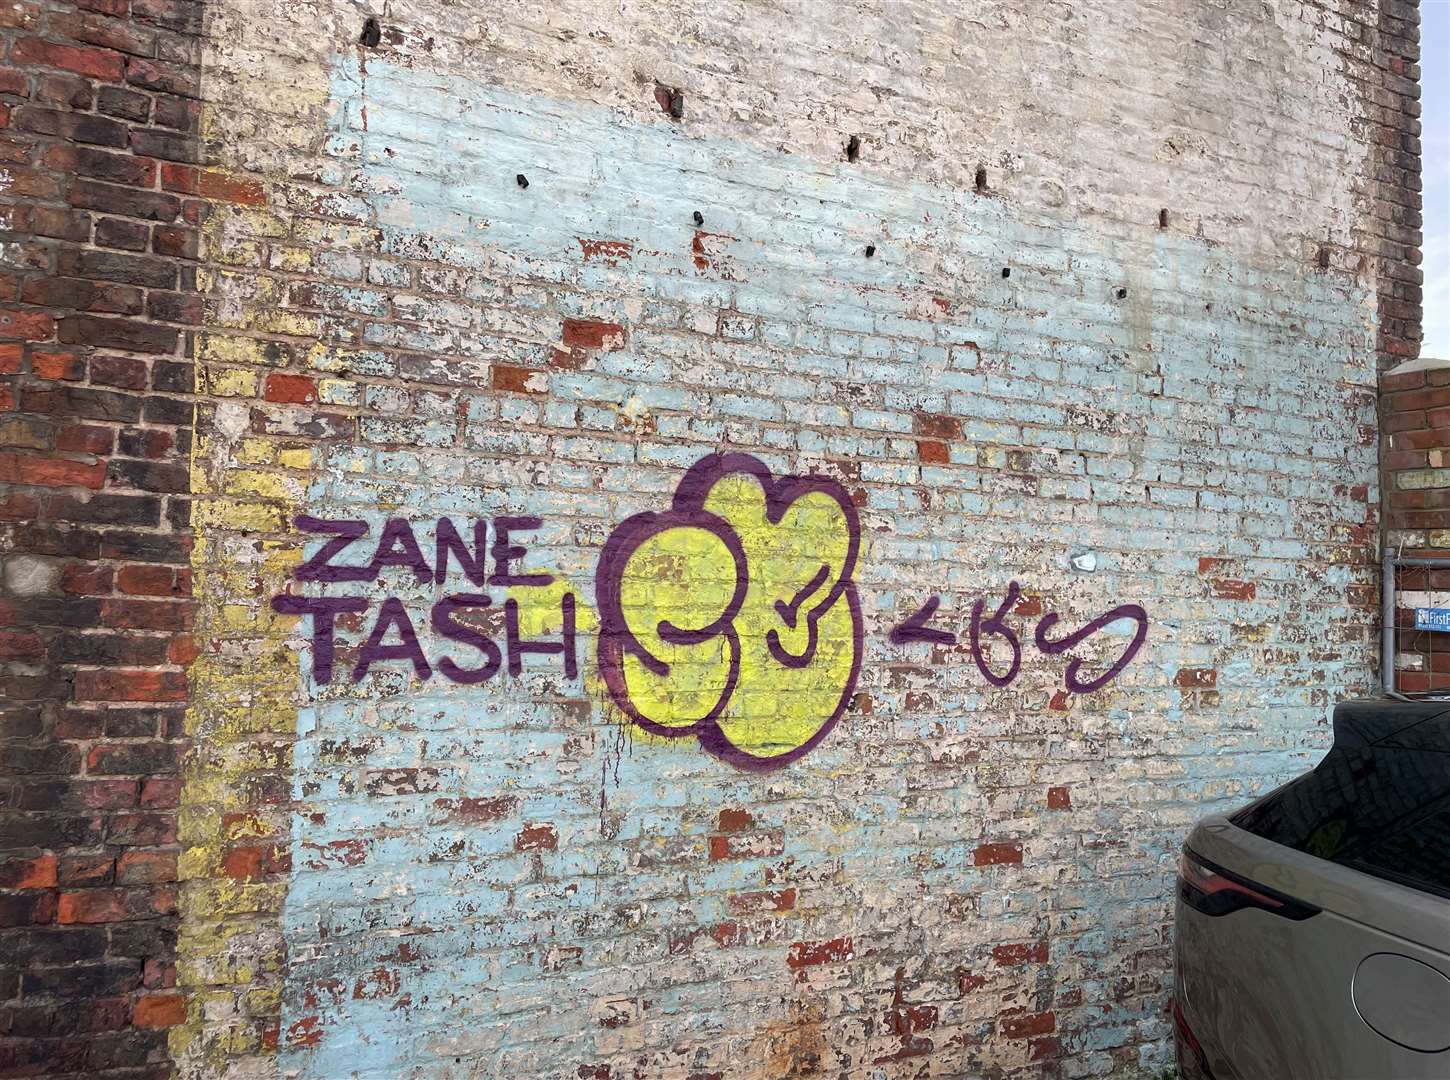 Another Zane tag, this time in a town centre car park